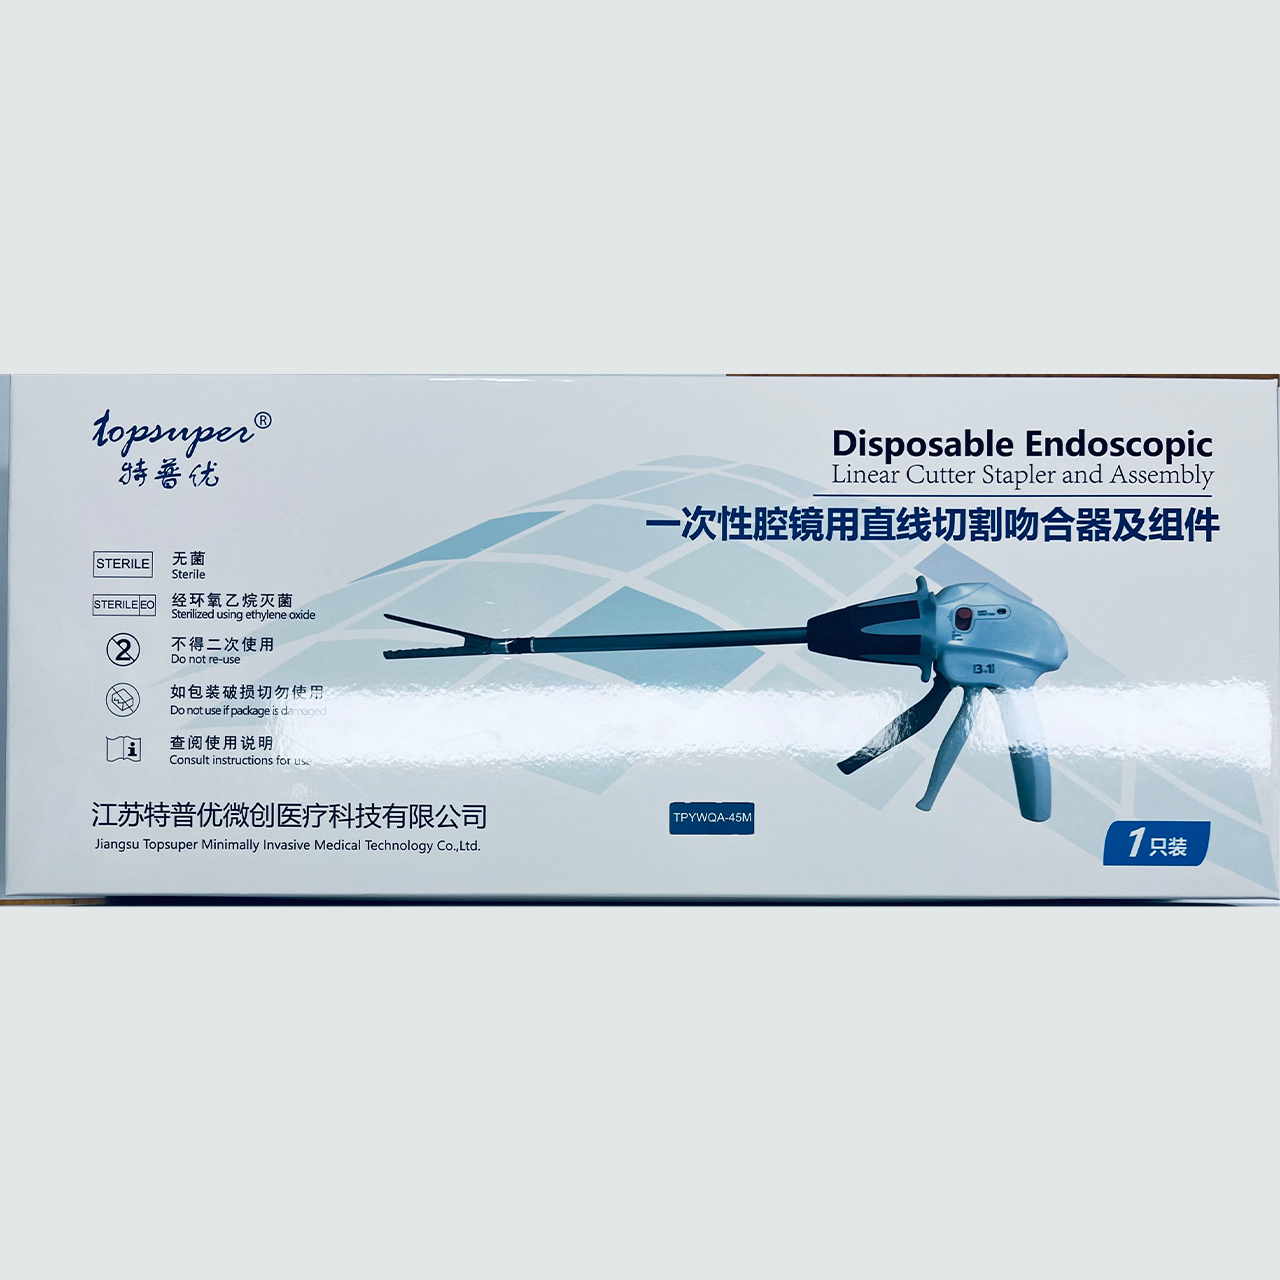 Disposable Endoscopic Linear Cutter Stapler and Assembly